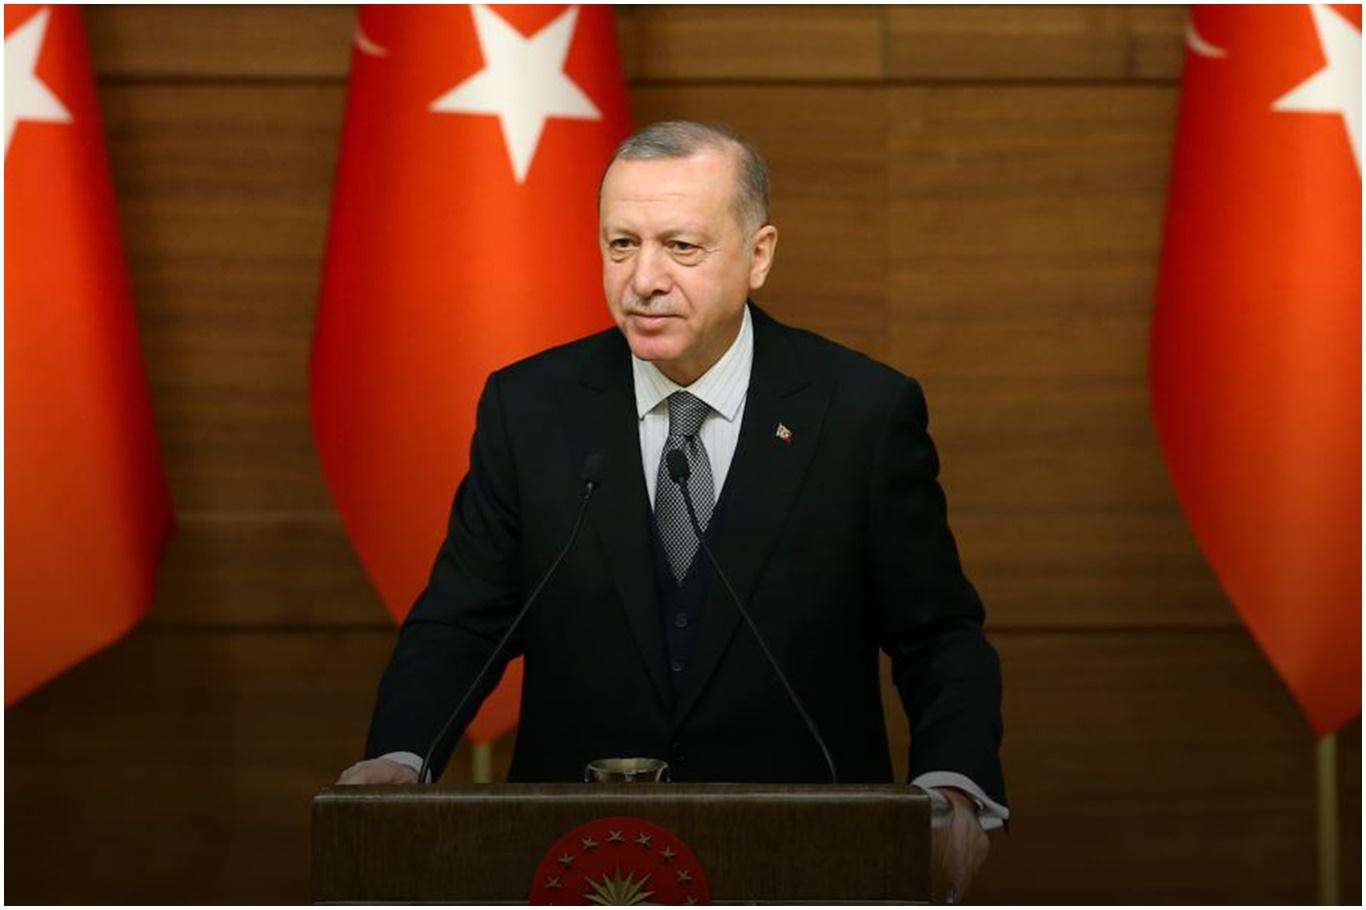 Erdoğan issues a condolence message on the passing of Prince Philip